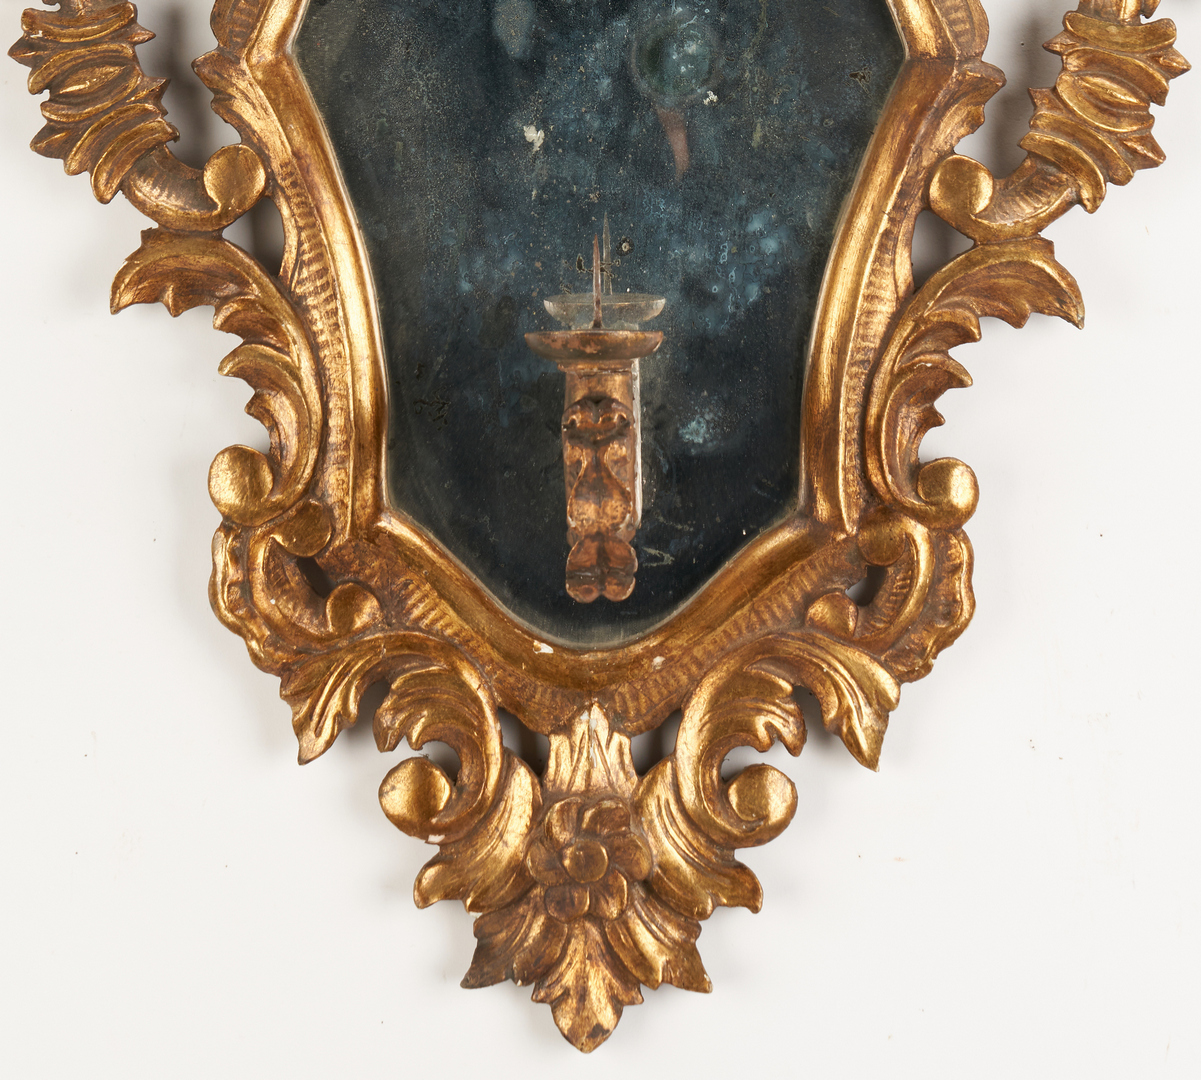 Lot 205: Pr. Italian Gilt Carved Mirrored Candle Sconces